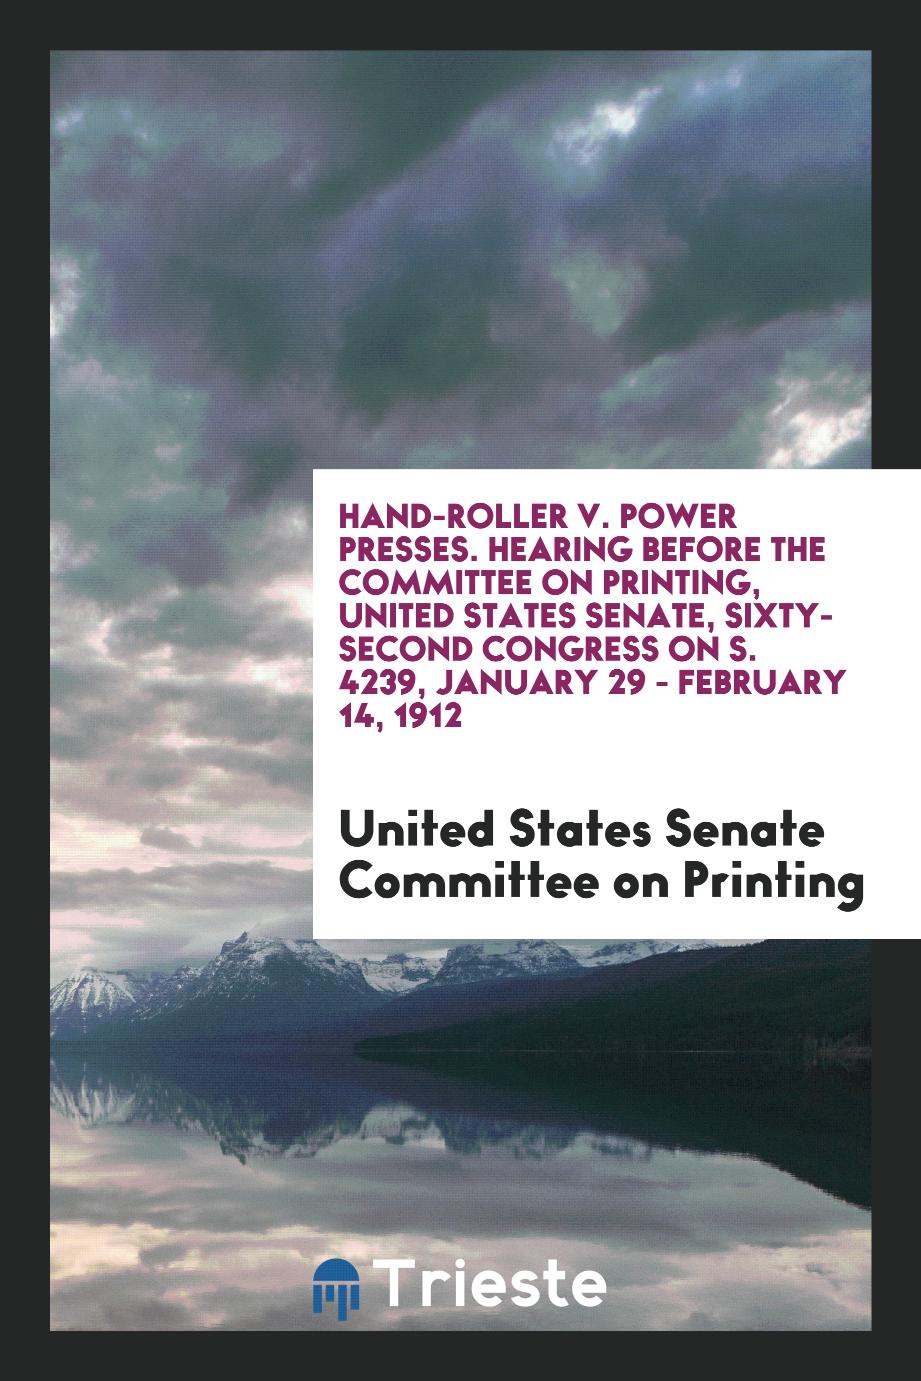 Hand-Roller v. Power Presses. Hearing Before the Committee on Printing, United States Senate, Sixty-Second Congress on S. 4239, January 29 - February 14, 1912